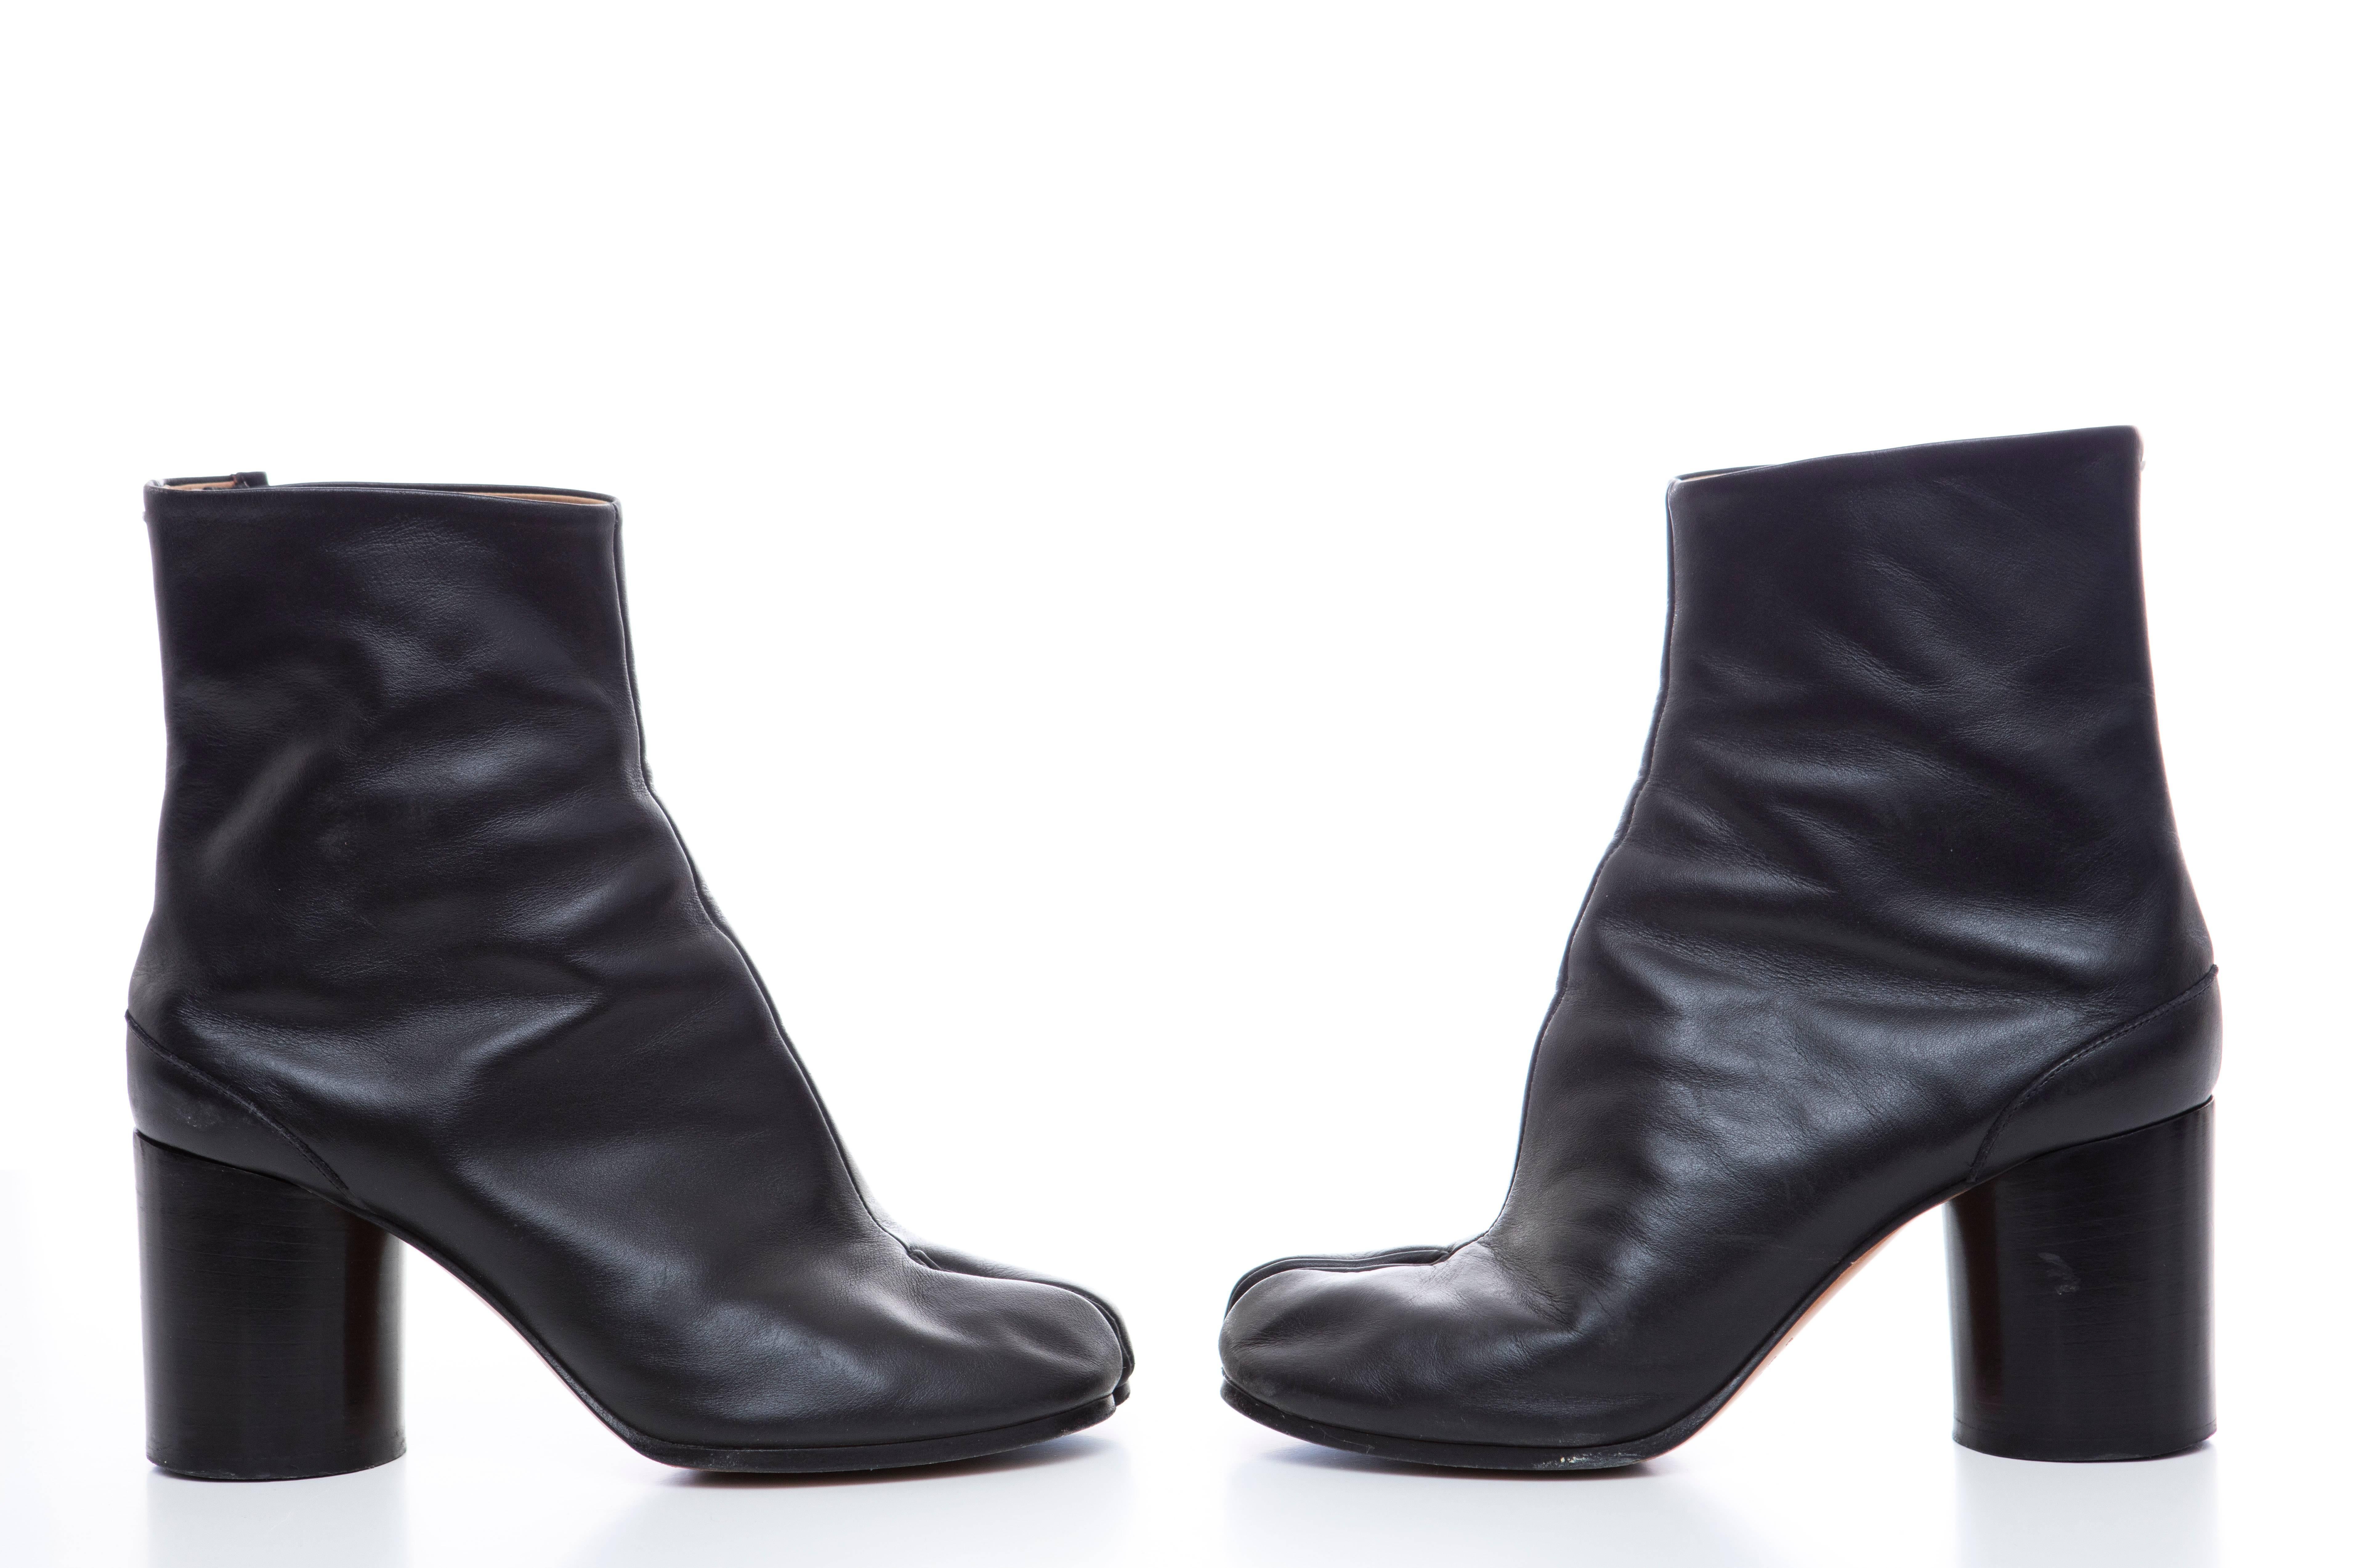 Maison Martin Margiela black leather Tabi ankle boots with tonal stitching, stacked heels and hook closures at backs.

EU. 38
US. 8

Heels: 3.25